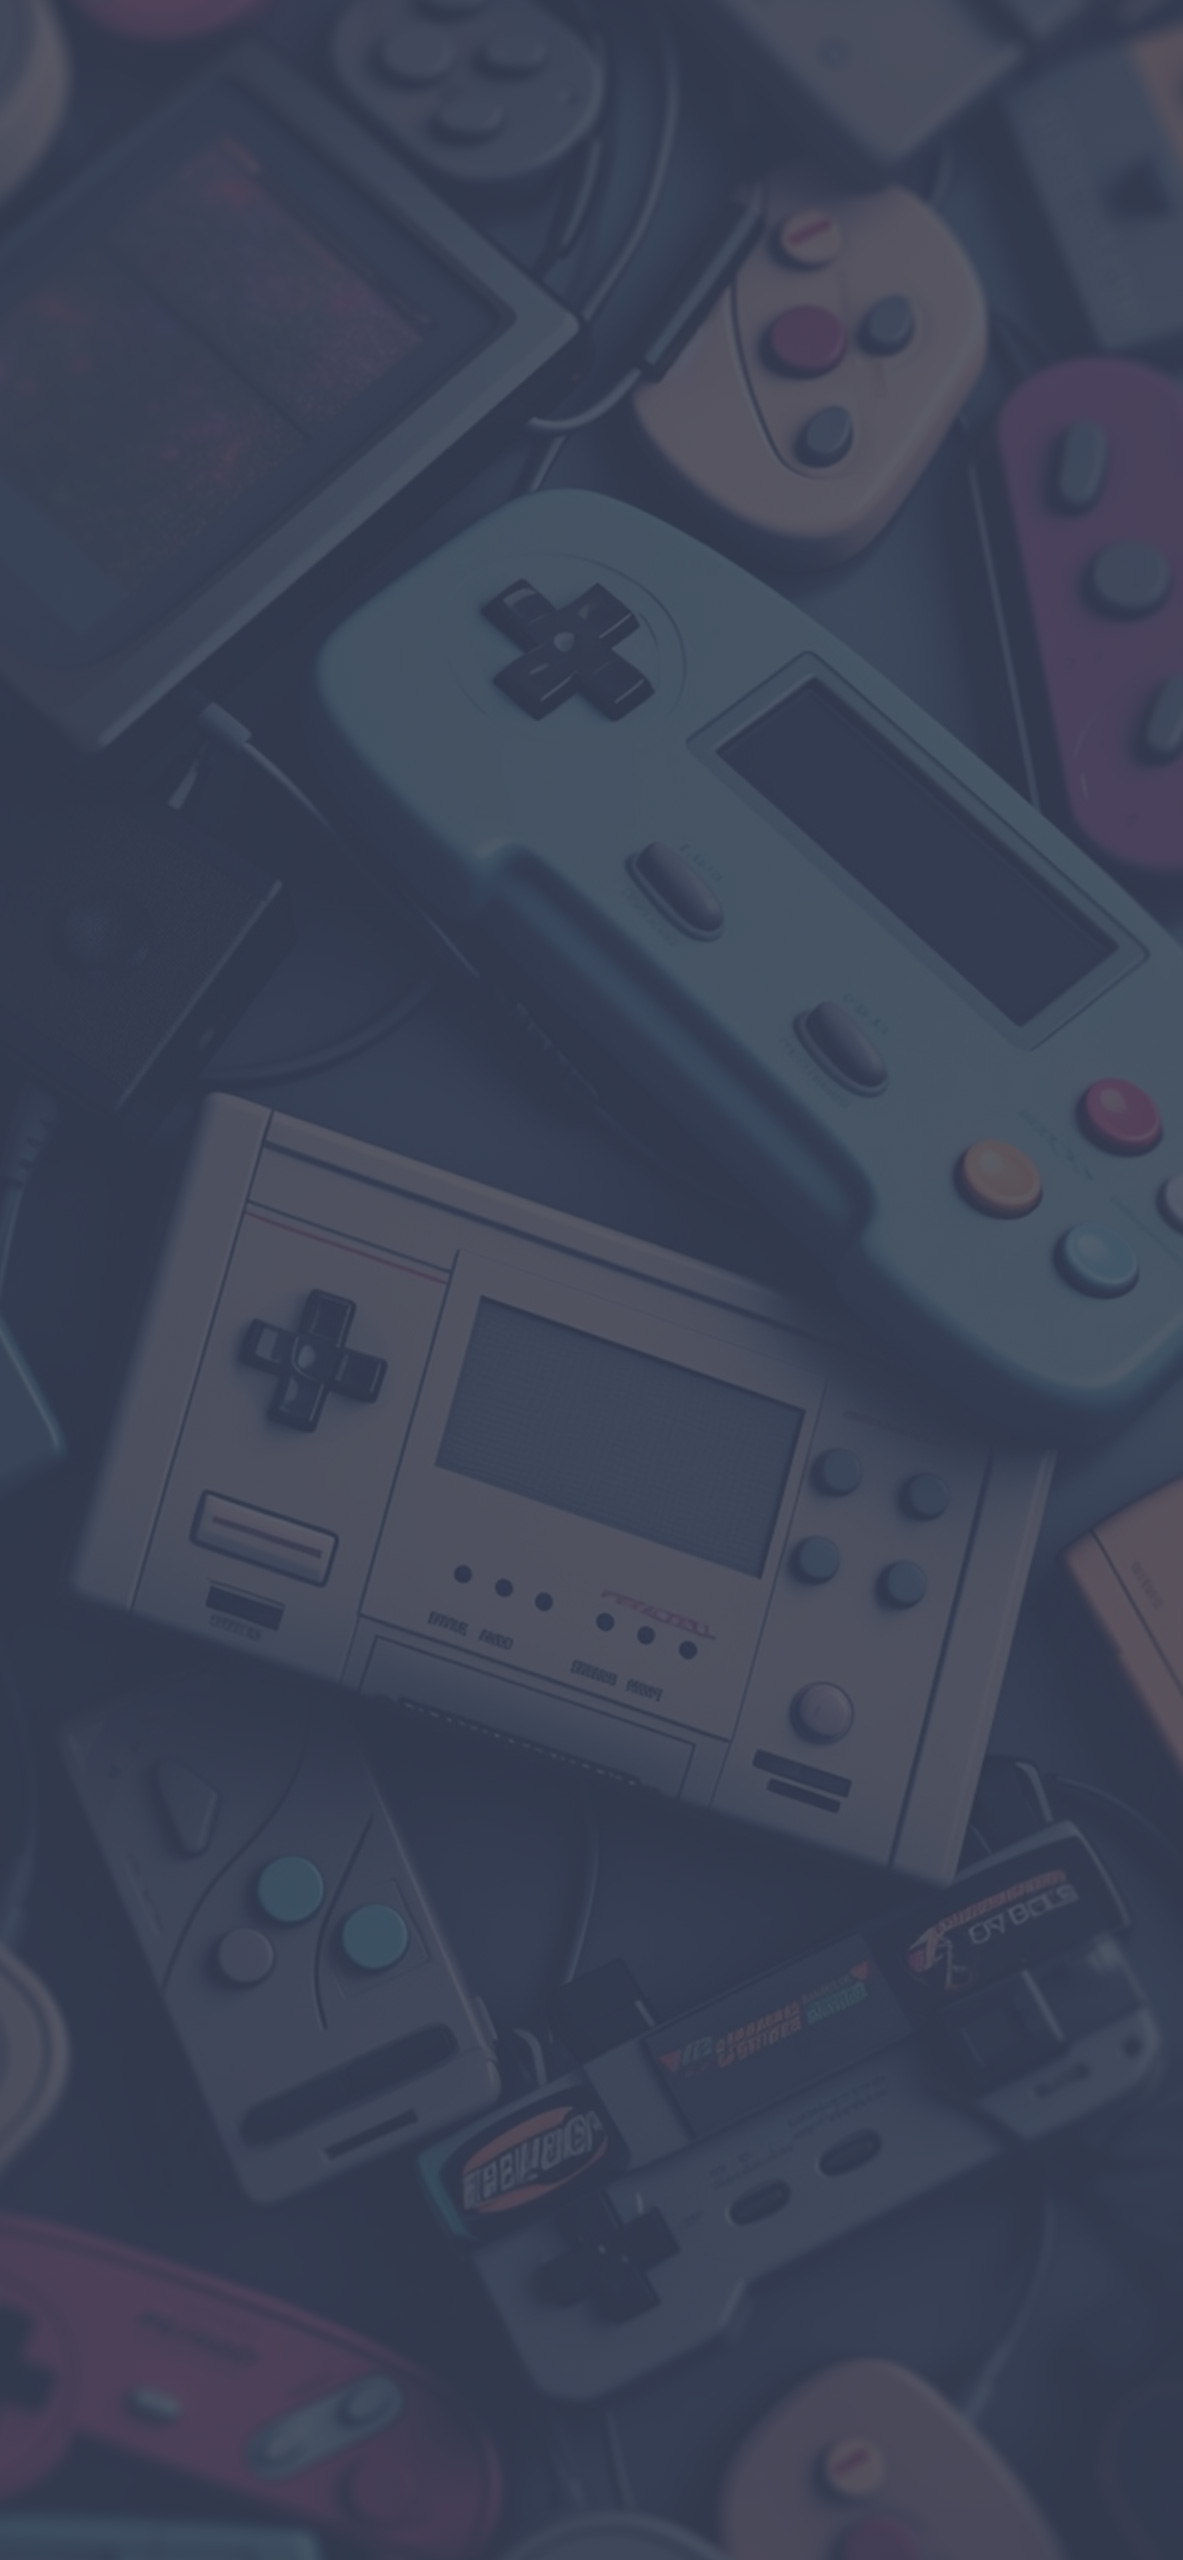 retro game controllers background